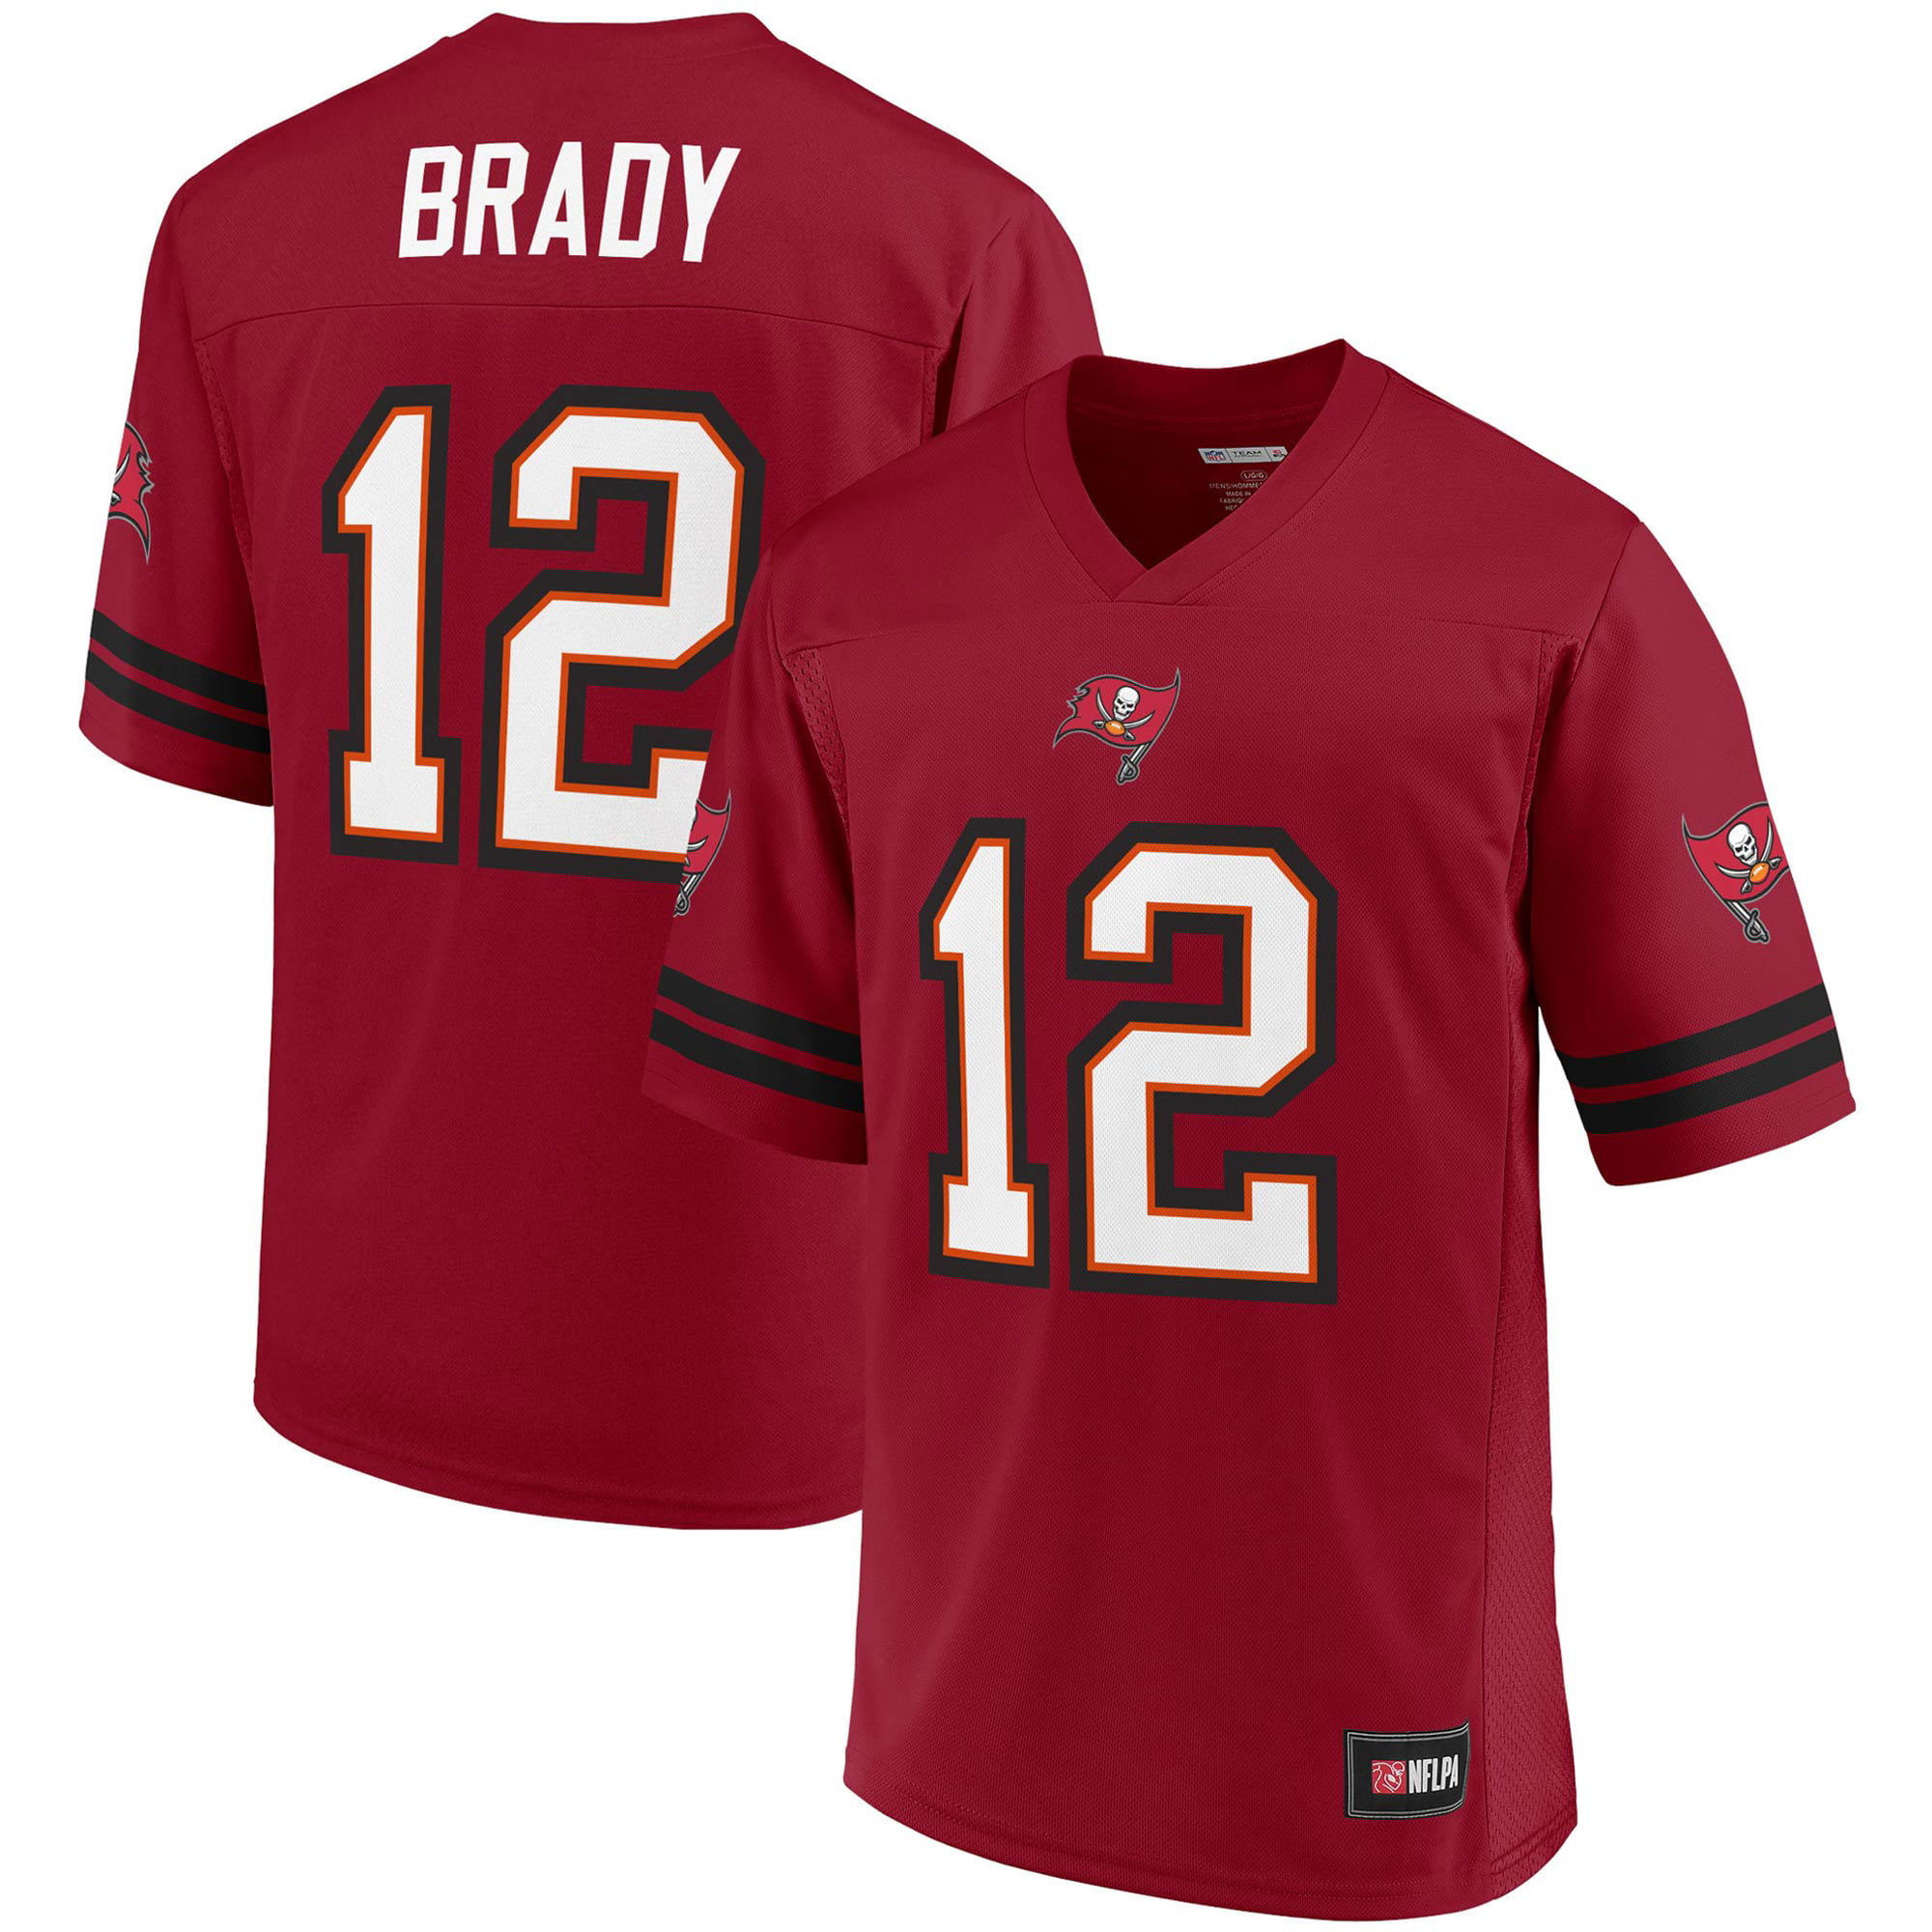 Men's NFL Pro Line by Fanatics Branded Tom Brady Red Tampa Bay Buccaneers Player ...